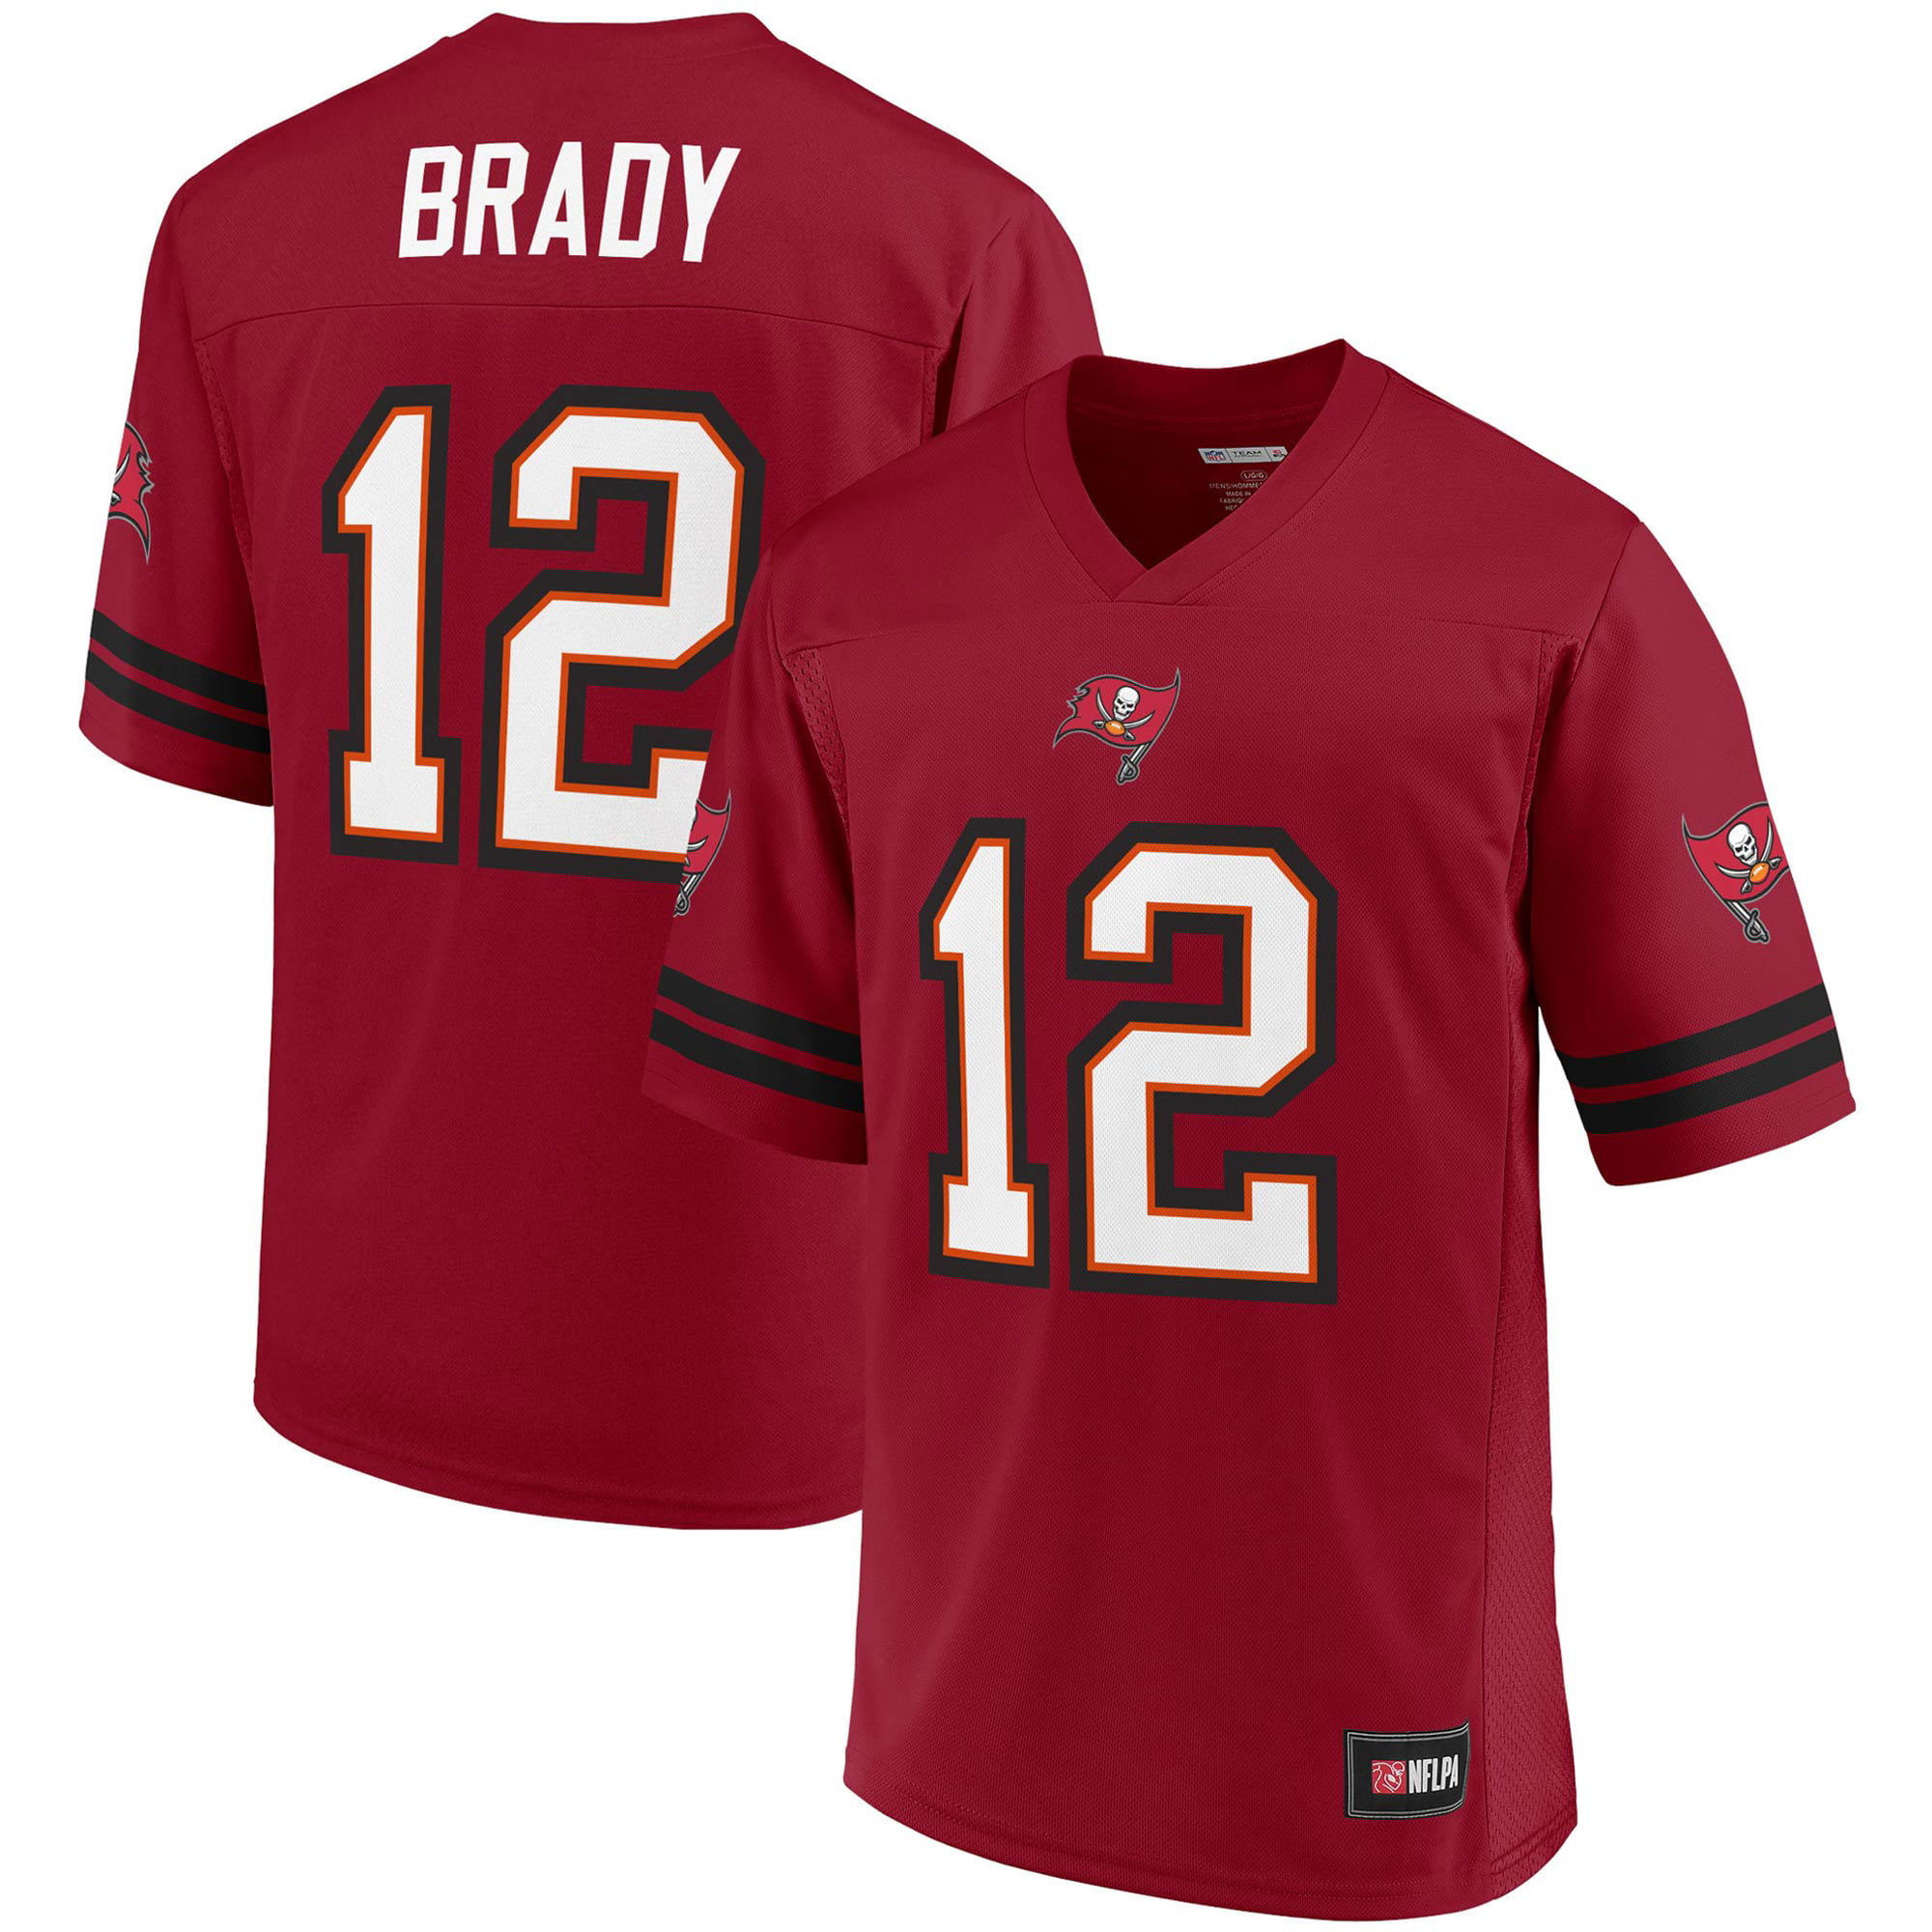 Men's NFL Pro Line by Fanatics Branded Tom Brady Red Tampa Bay Buccaneers Player ...